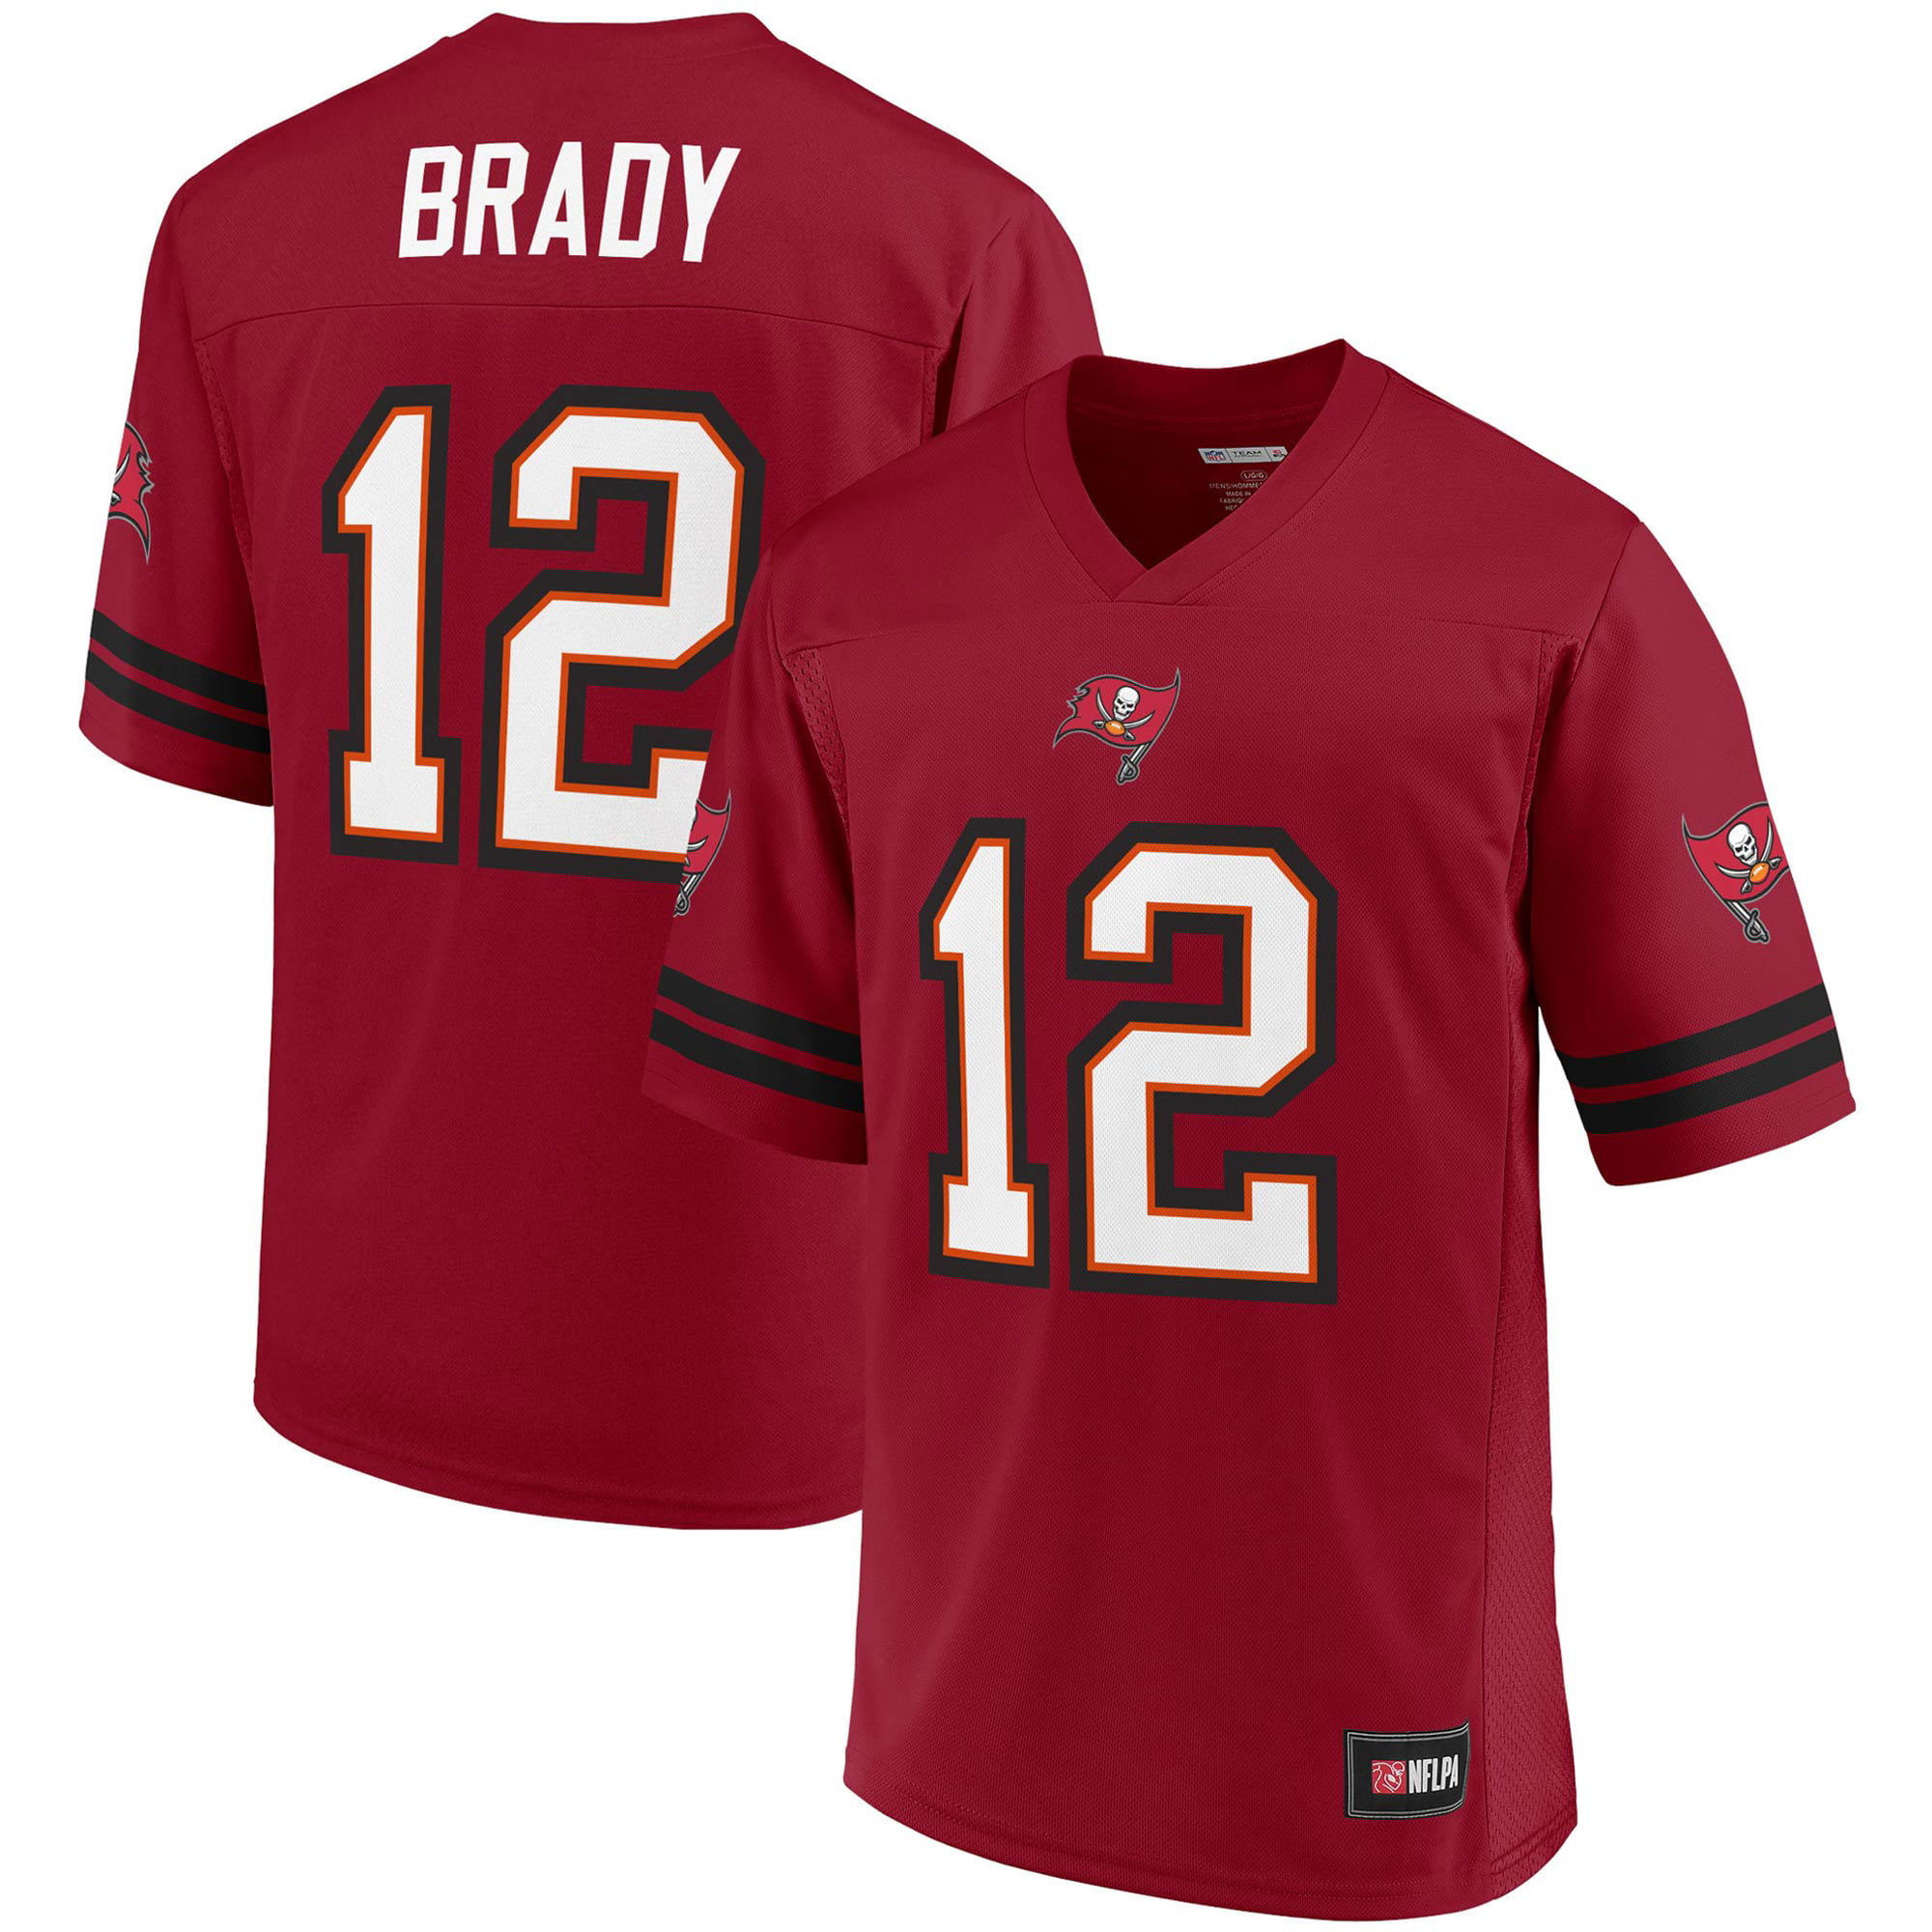 Men's NFL Pro Line by Fanatics Branded Tom Brady Red Tampa Bay Buccaneers Player ...